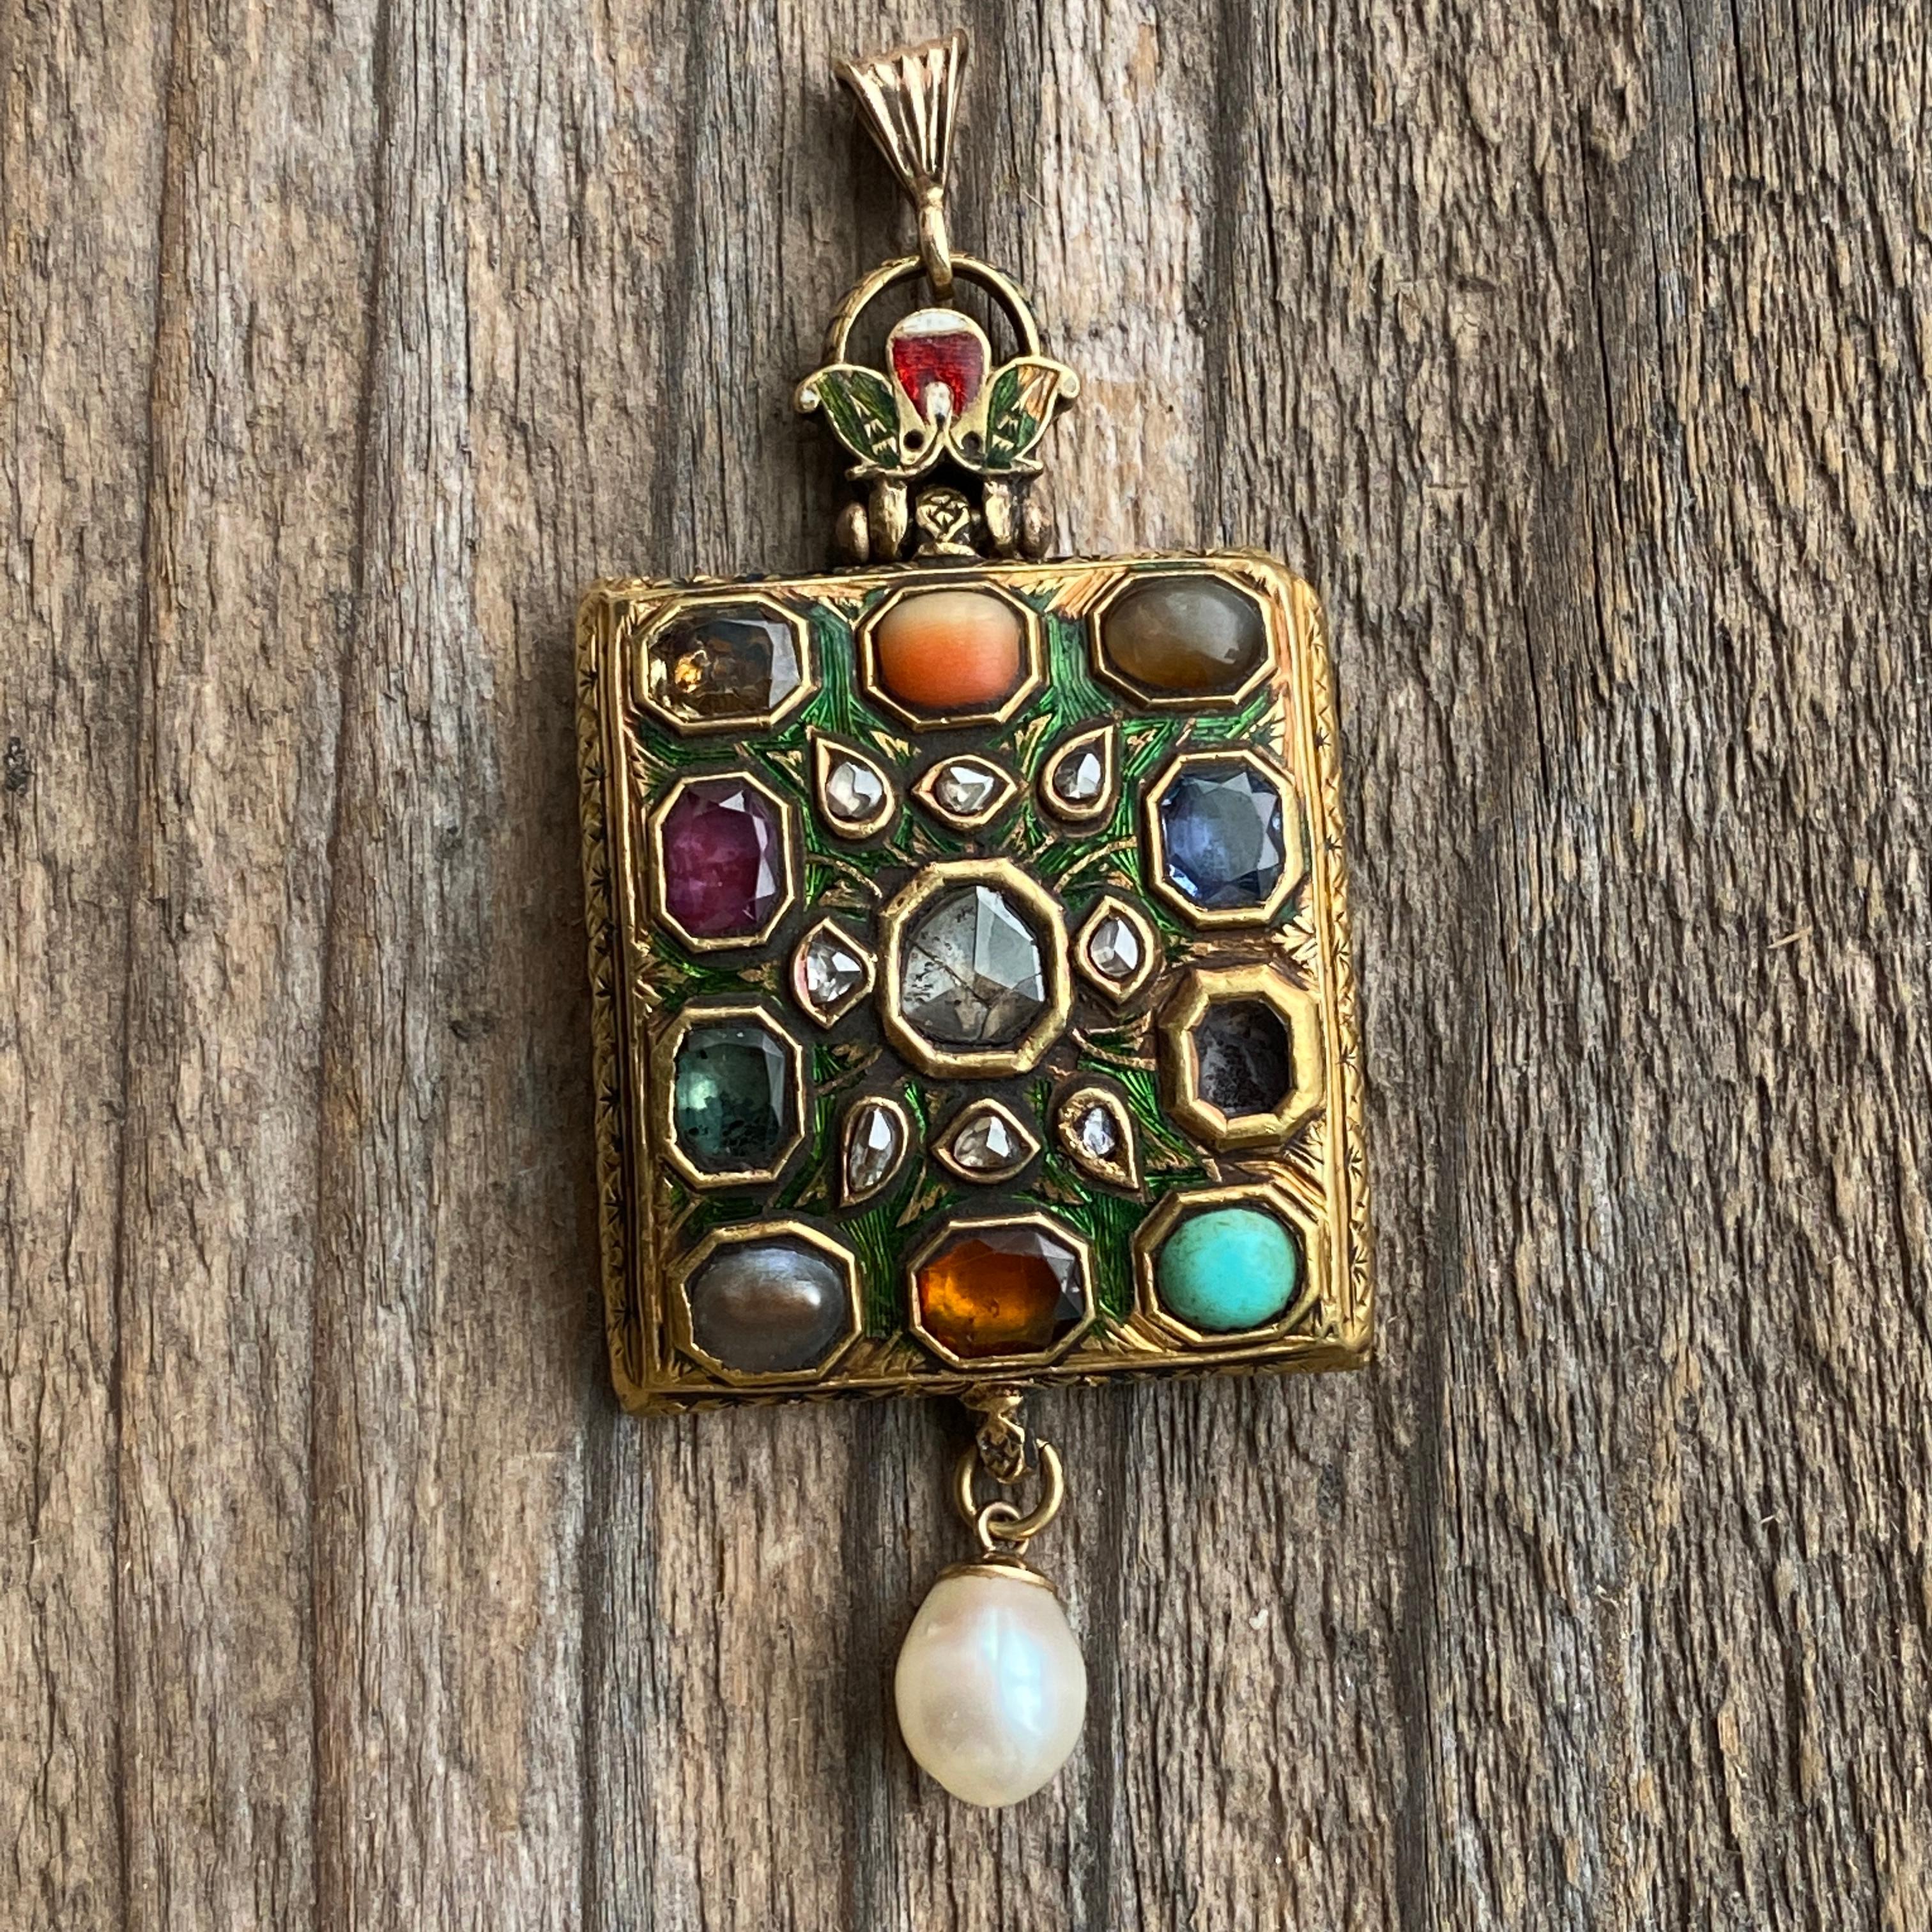 Details:
A stunning unique antique pendant in 22K yellow gold with 11 gemstones, and studded with diamonds, engraved and adorned with enamel work. Originally an armband, and later converted to a pendant. Both sides are adorned, and enameled. The